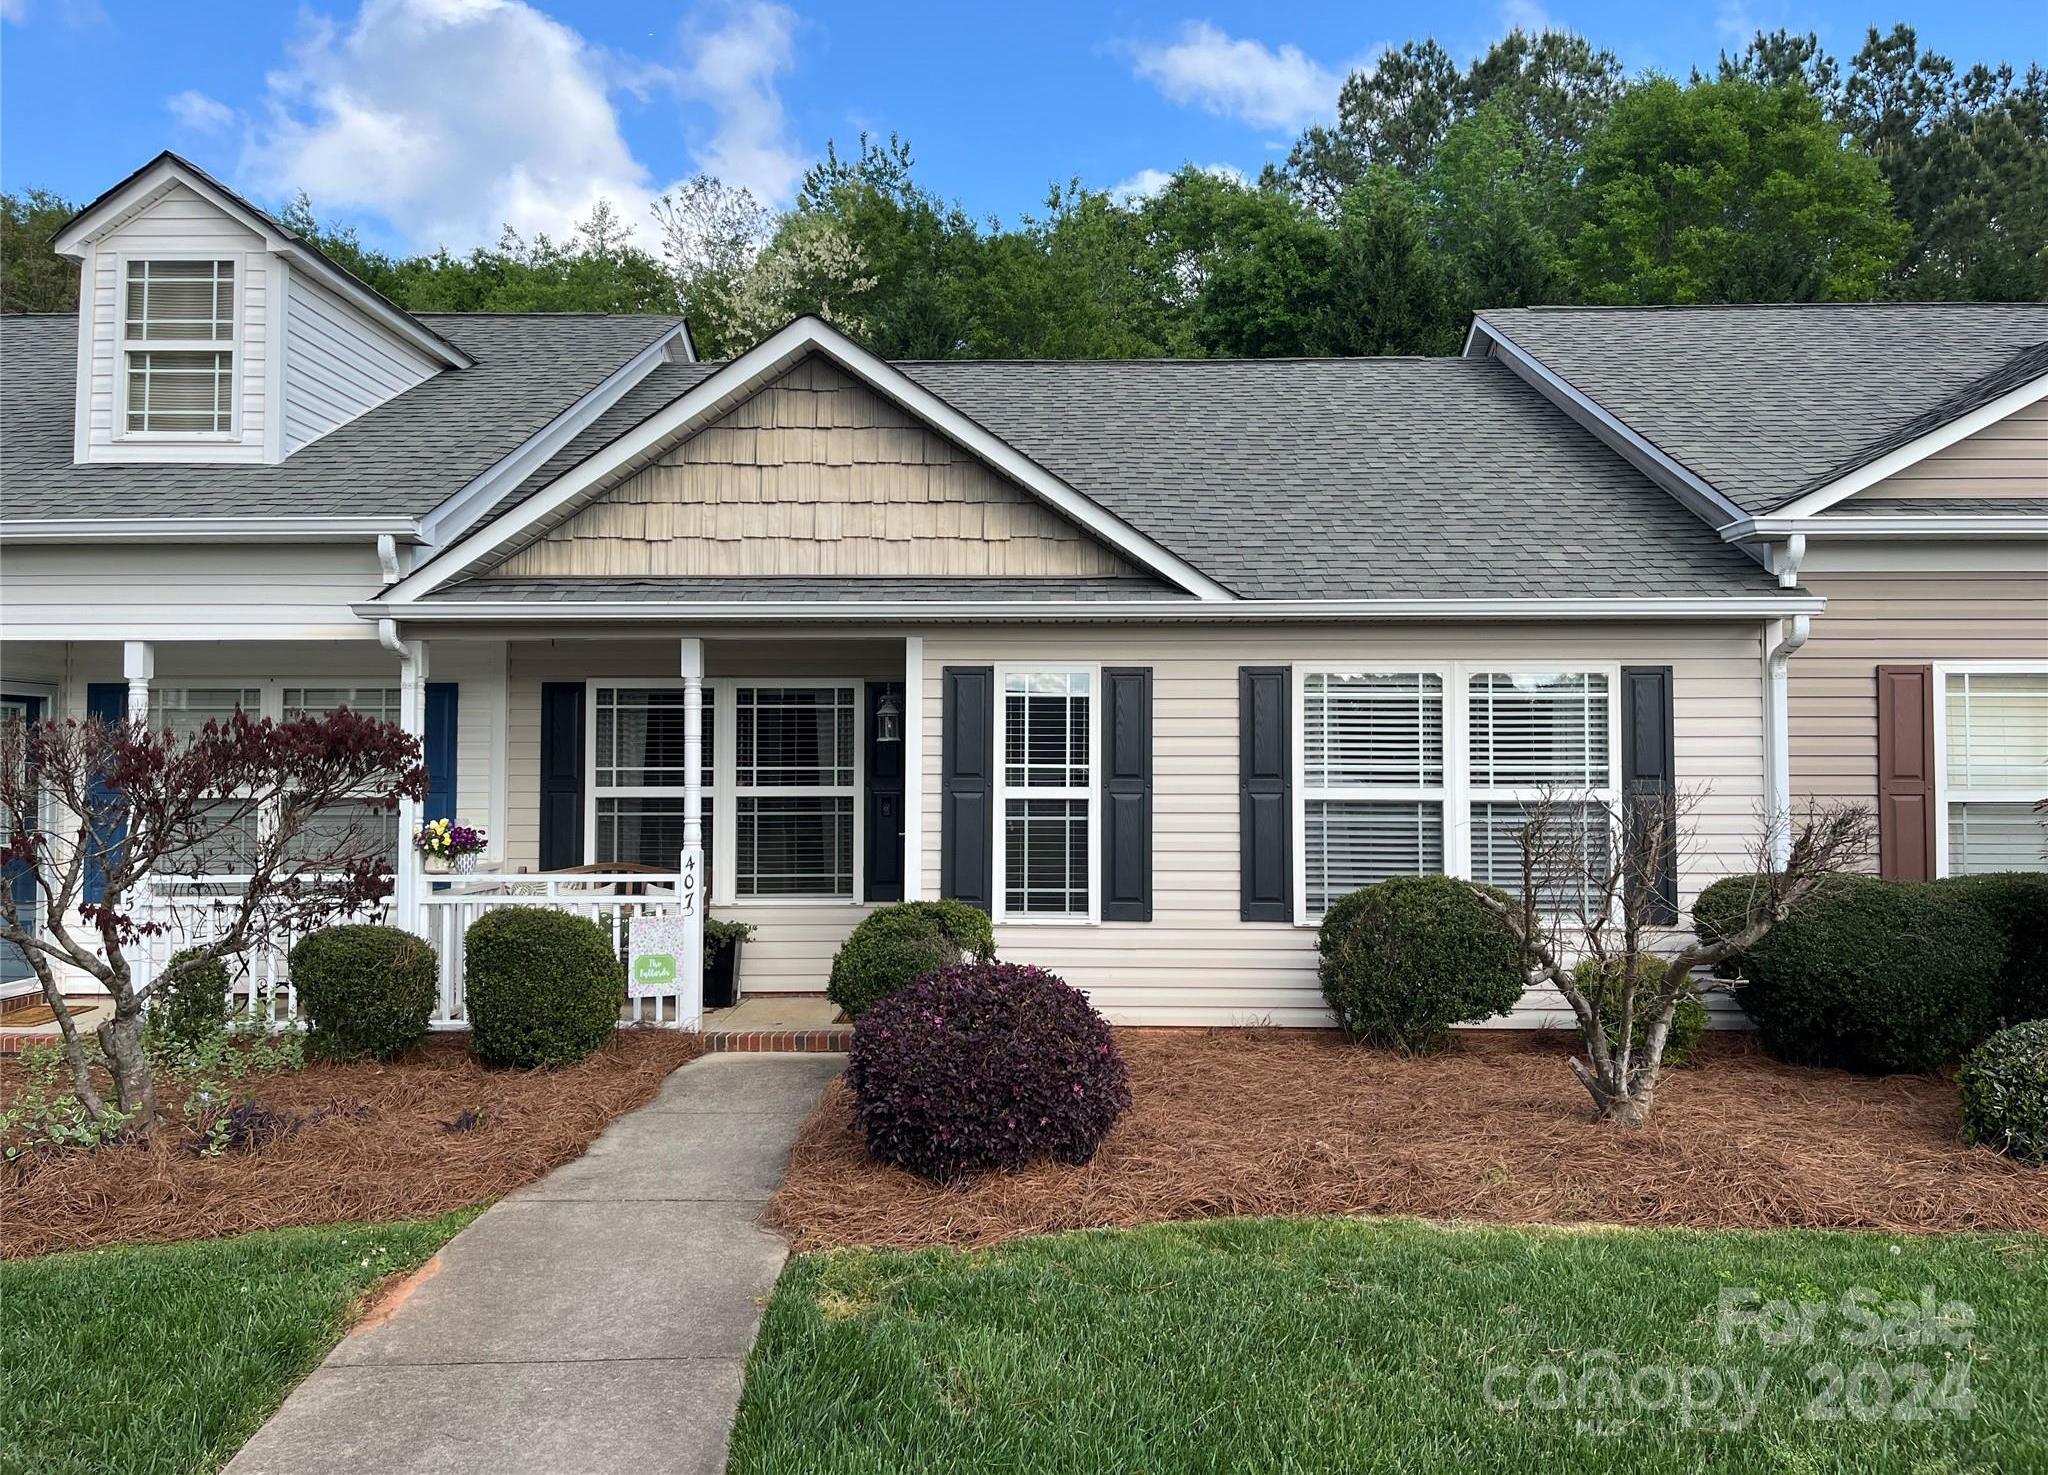 Photo one of 407 Guiness Pl Rock Hill SC 29730 | MLS 4128221